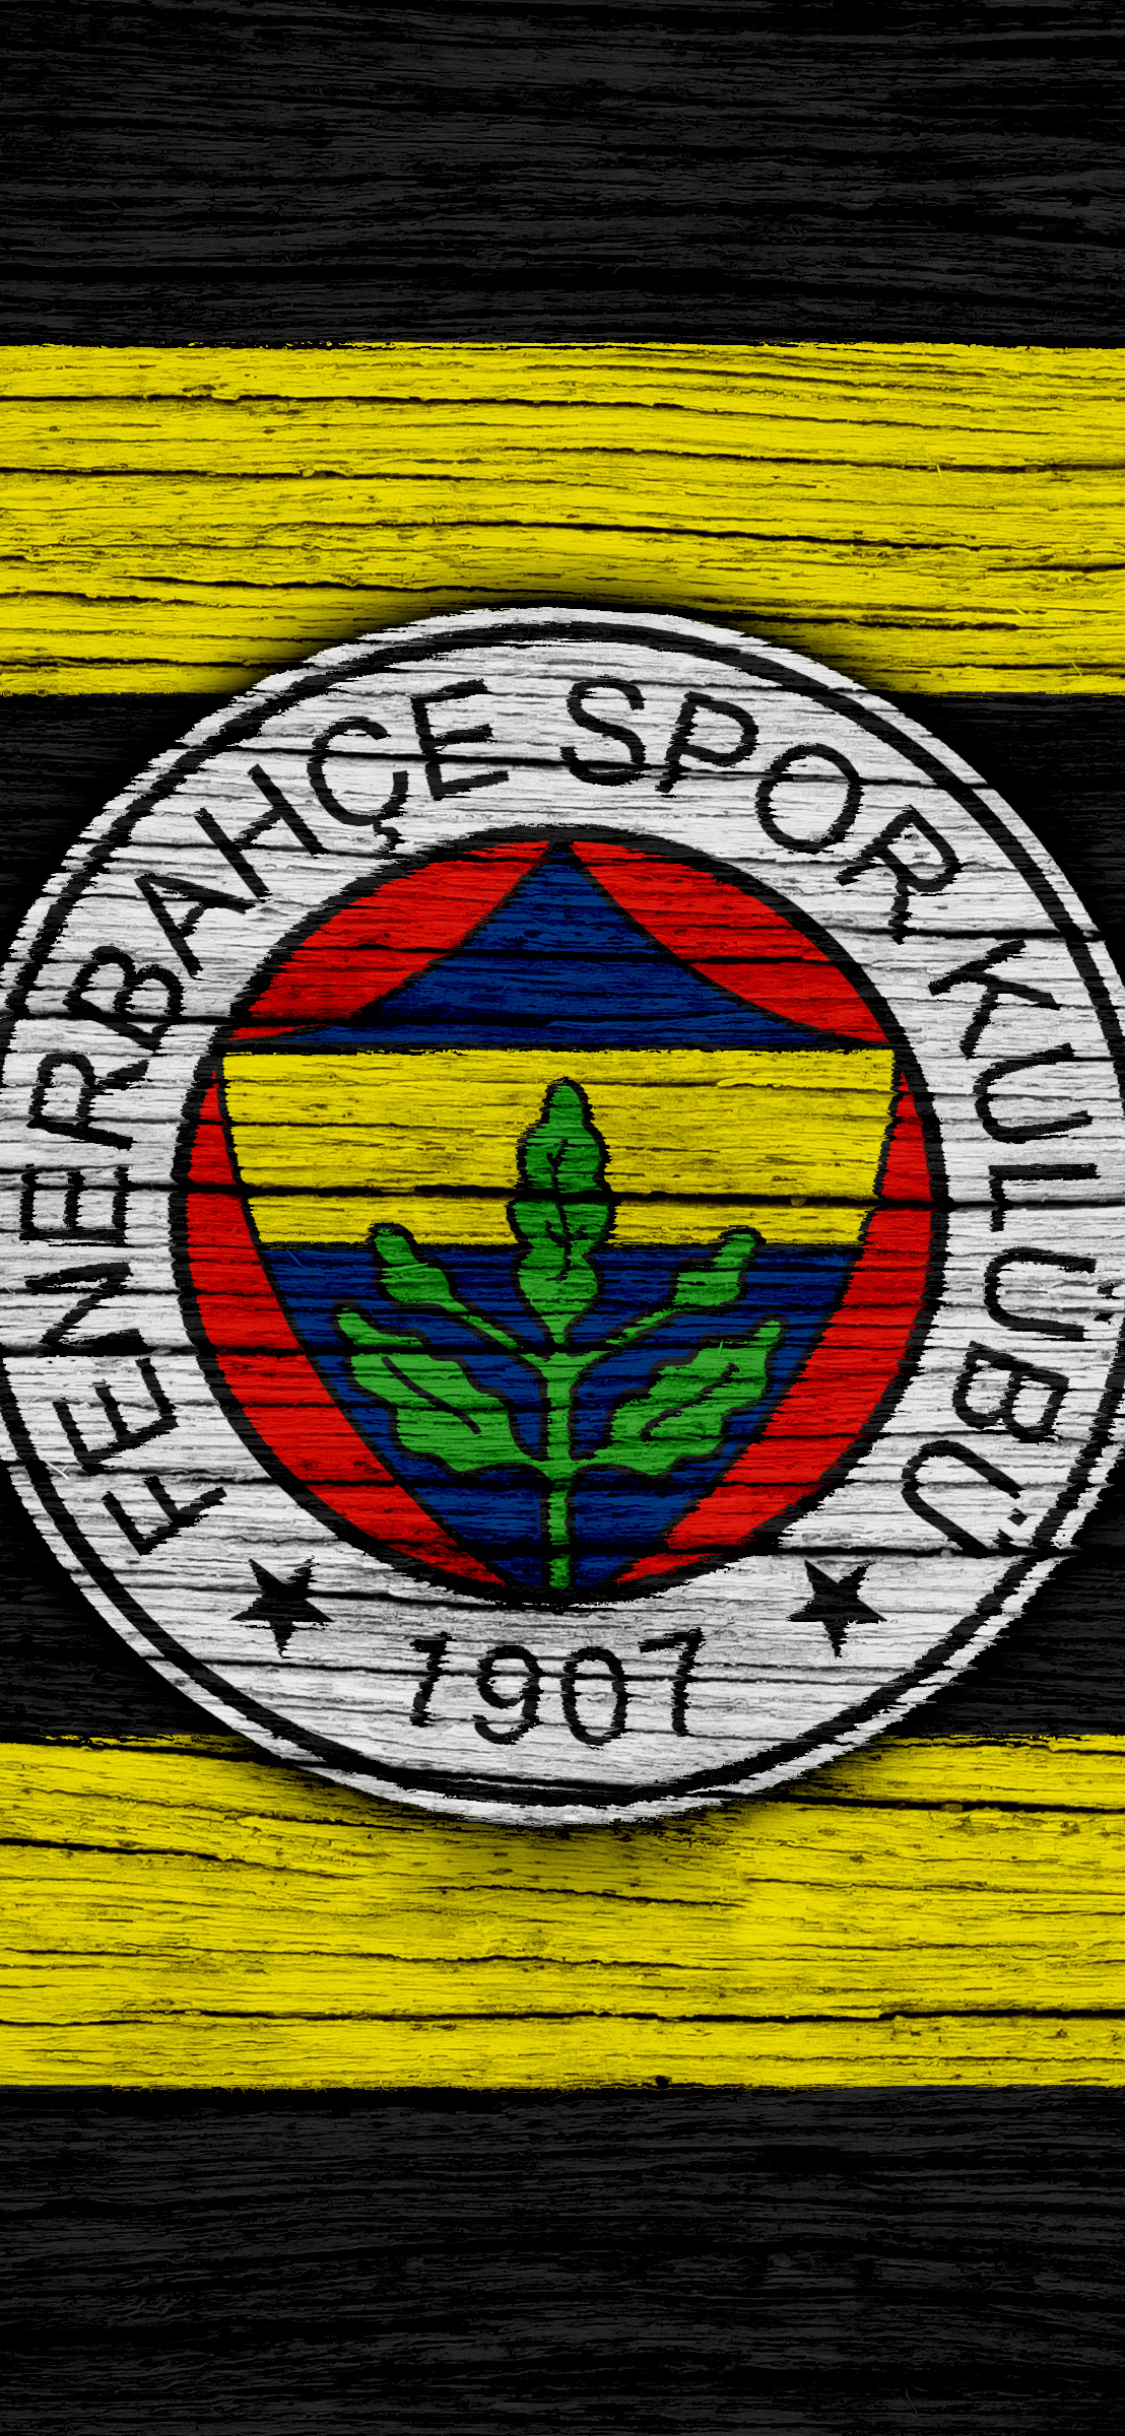  Fenerbahçe S K HD Android Wallpapers